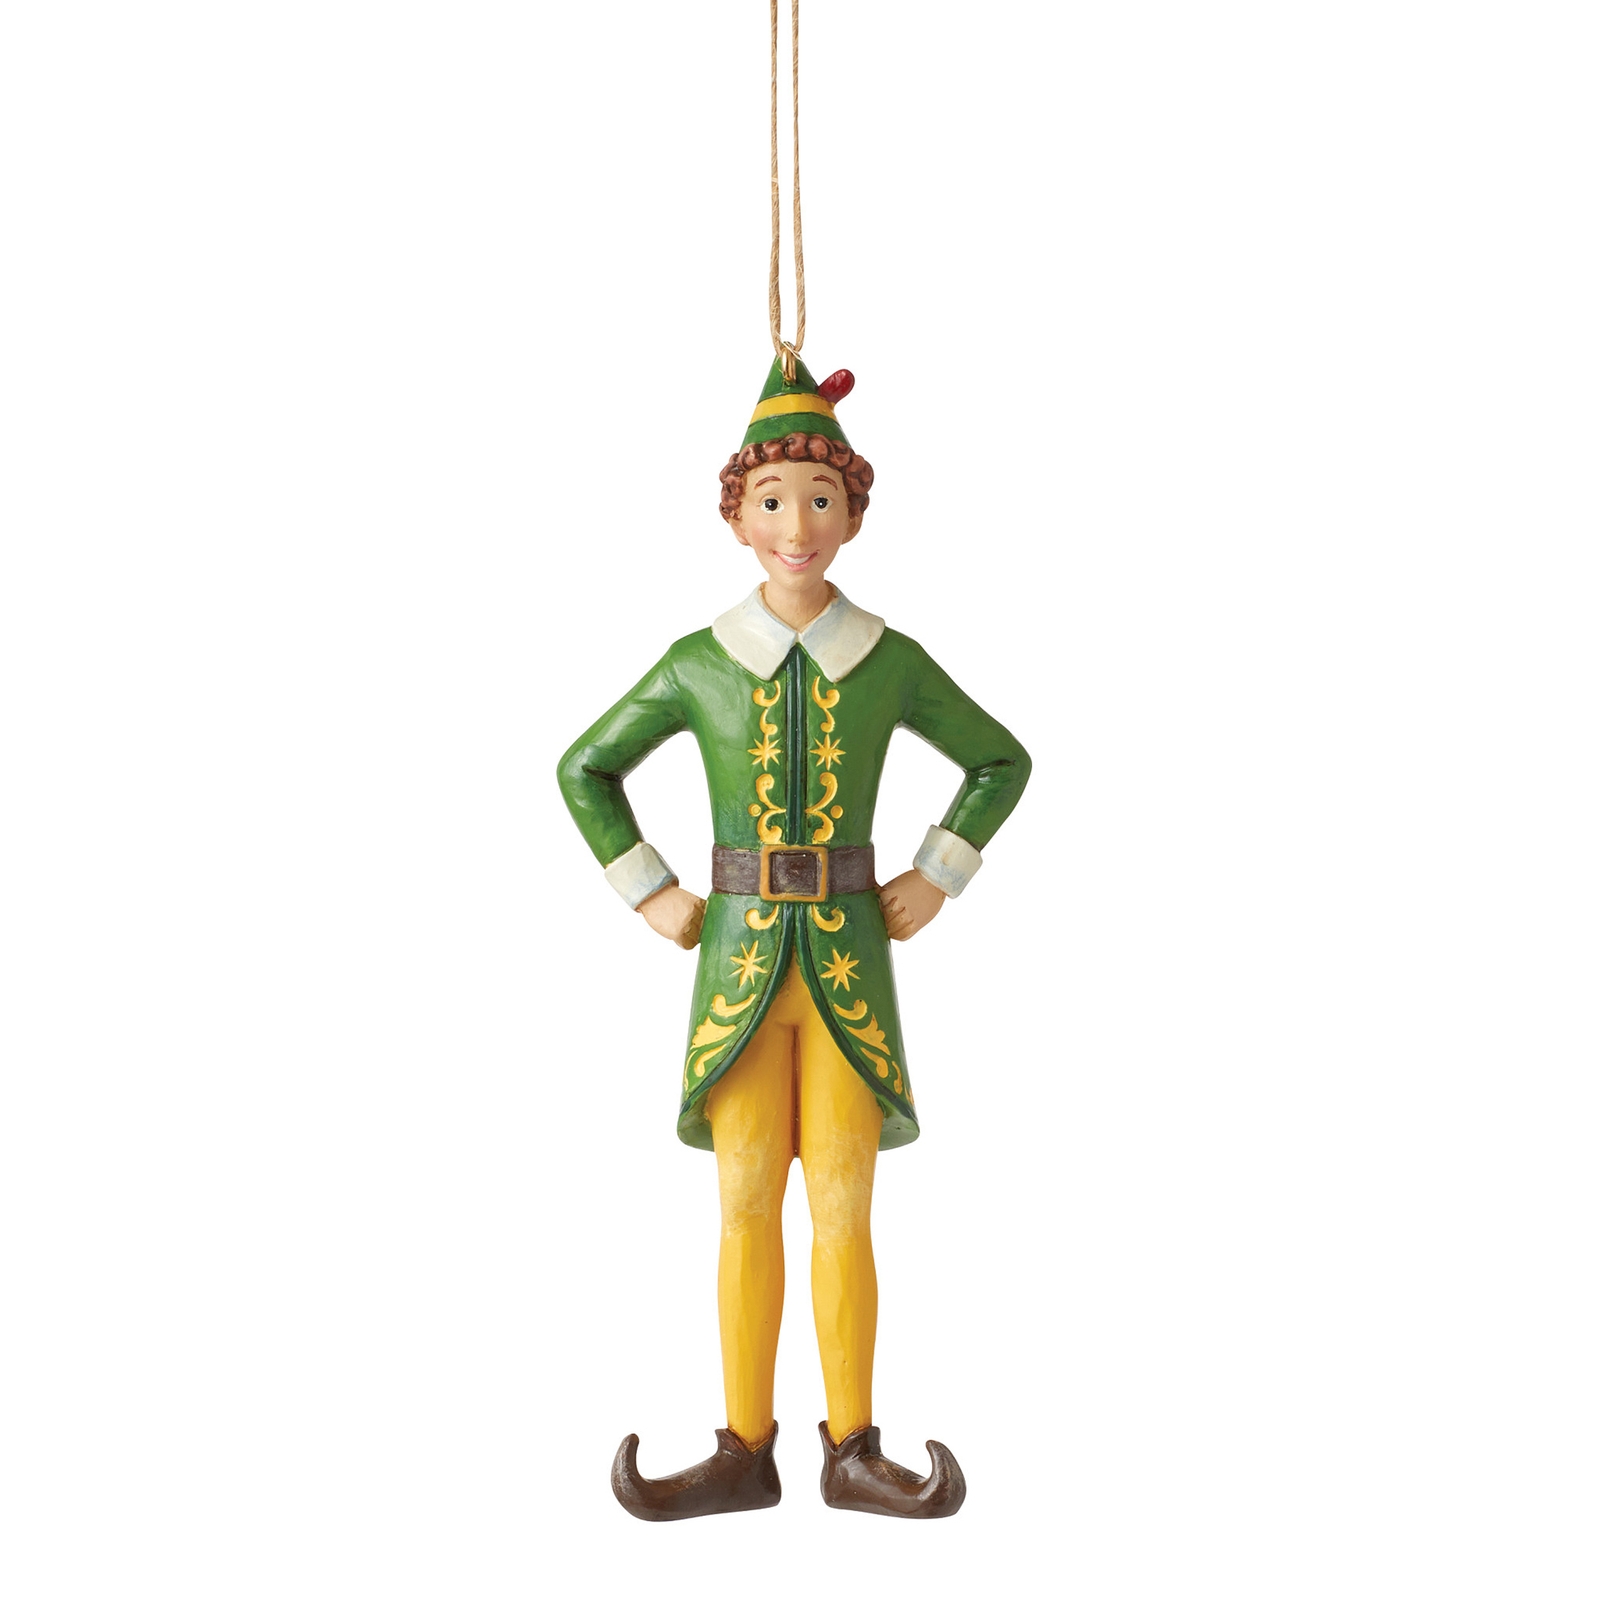 Photos - Other Souvenirs Enesco Elf by Jim Shore Buddy Elf in Classic Pose Hanging Ornament (14.5cm 